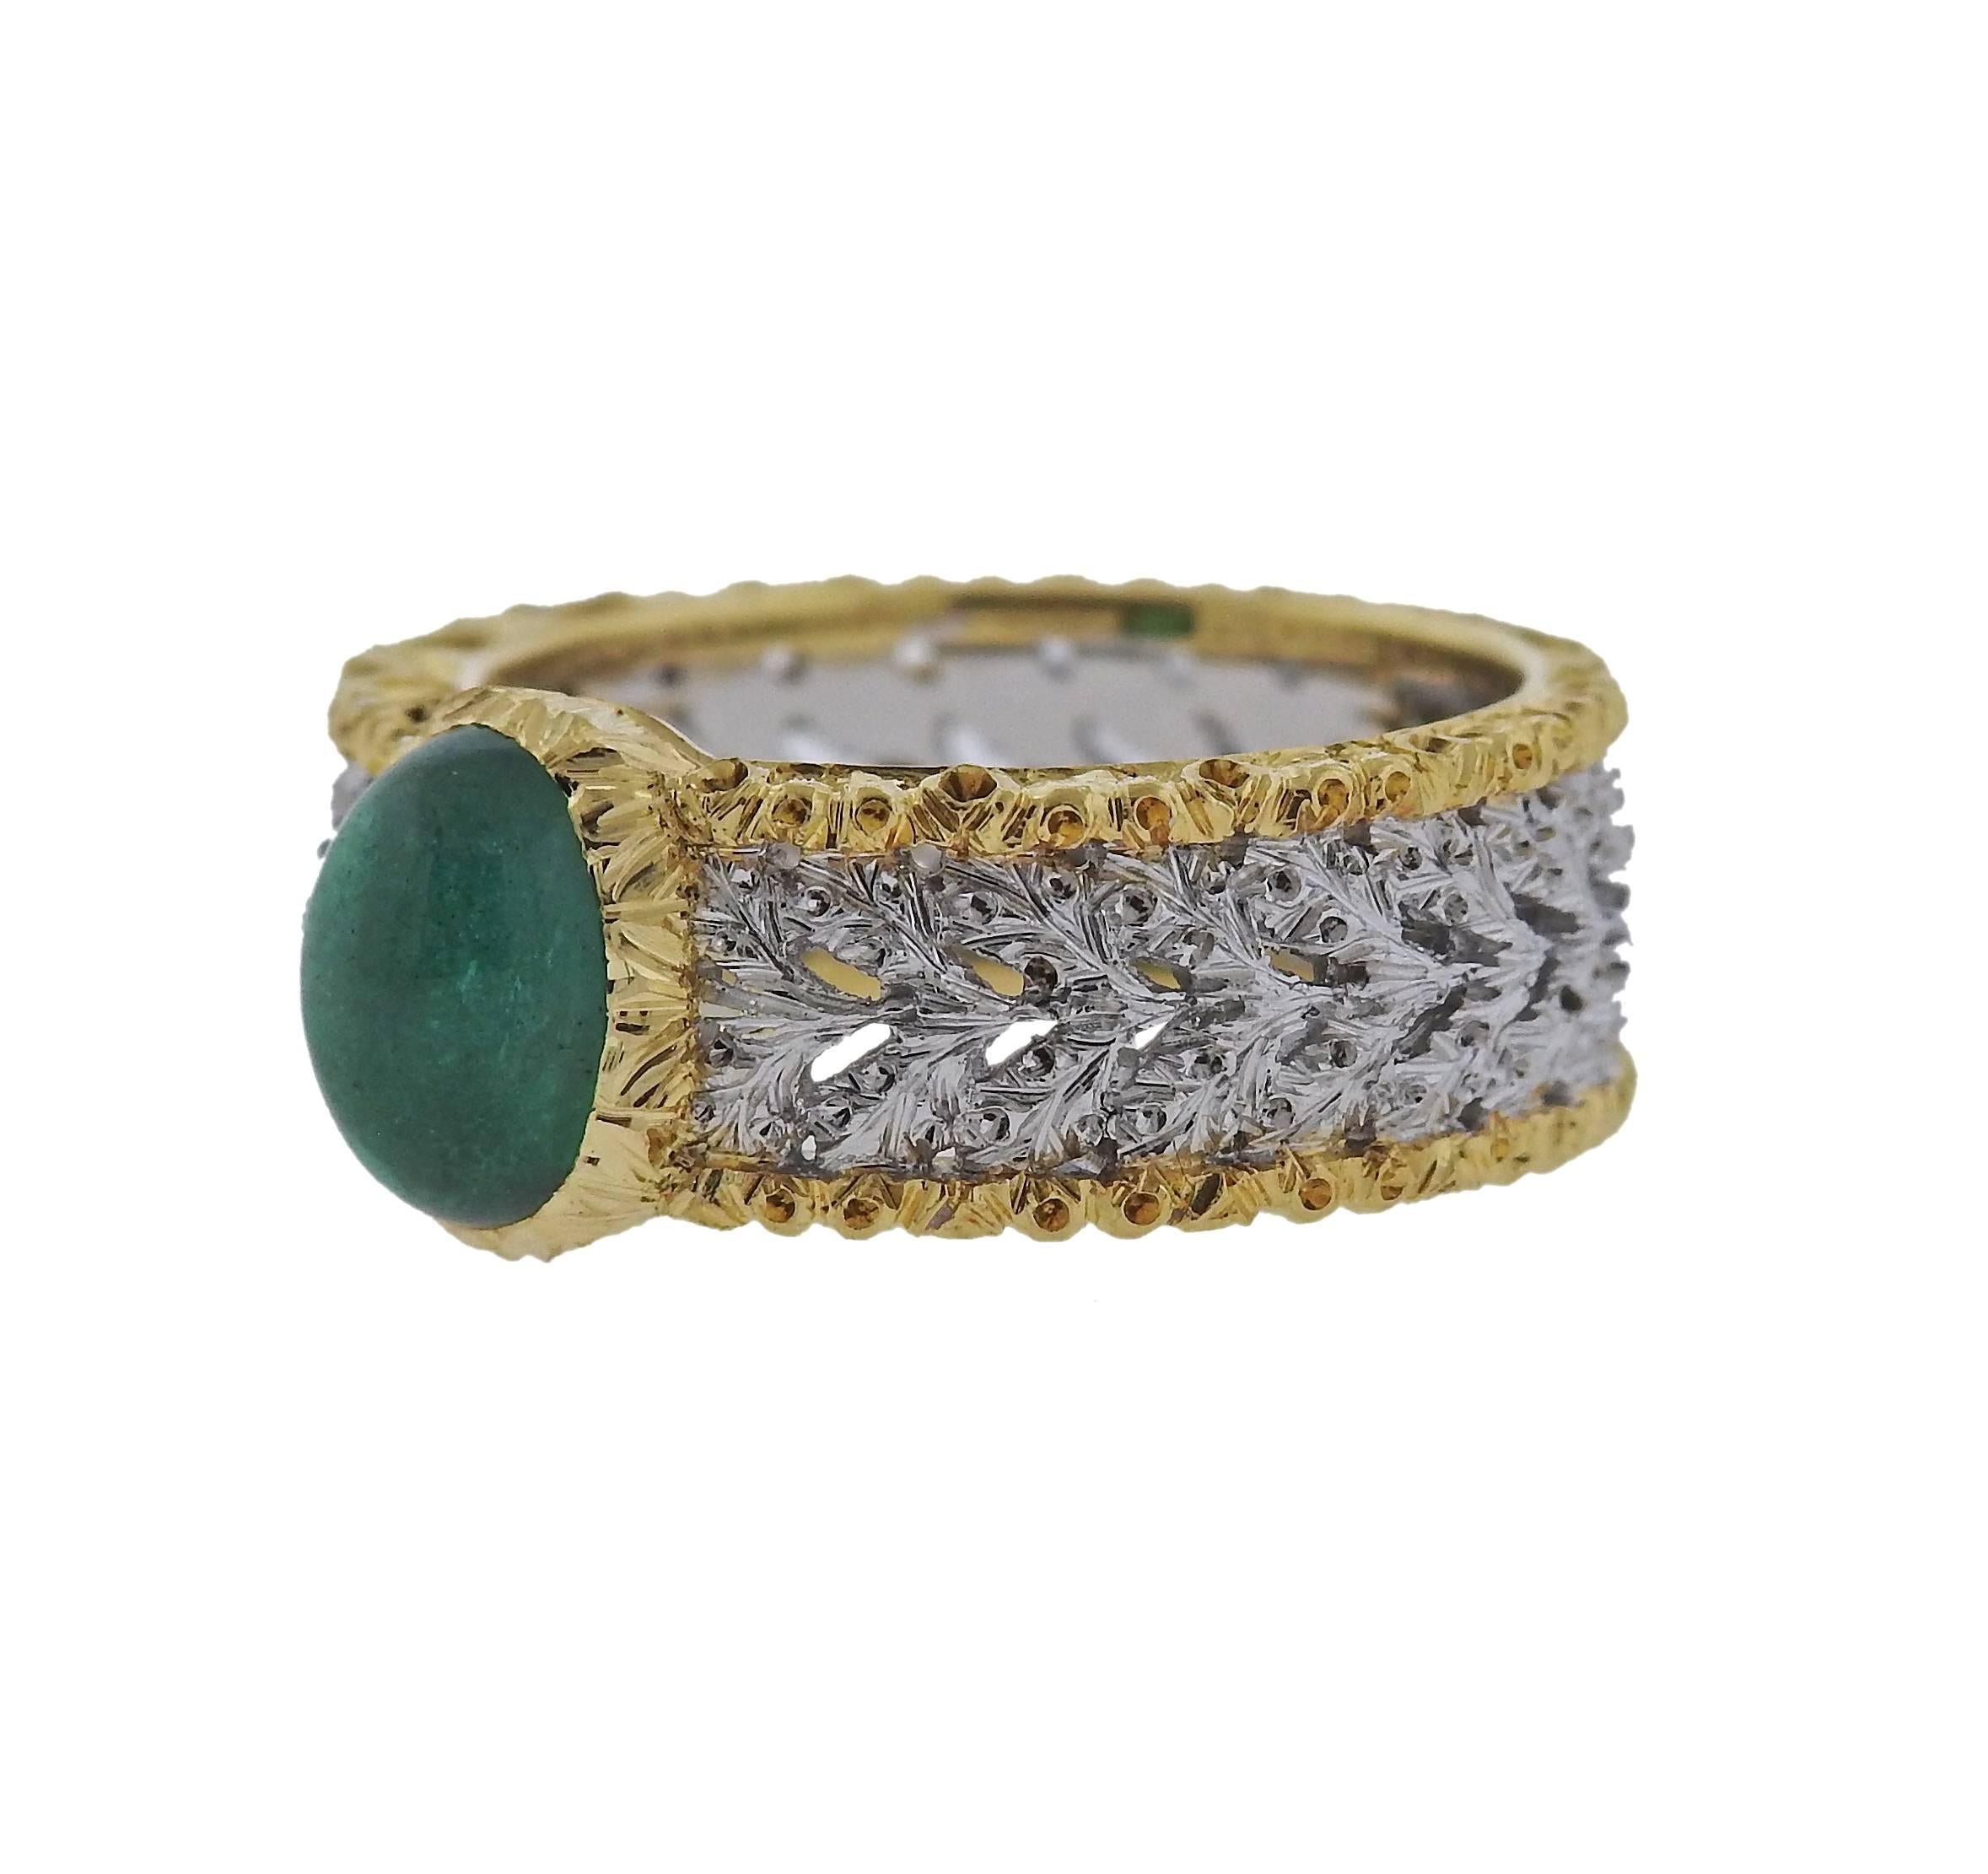 18k gold band ring crafted by Buccellati. Featuring an approximately 1.46ctw emerald cabochon. Ring is a size 6 and measures 9mm wide. Marked X5617, 18k, Buccellati, Italy , 269MI, 750. Weight is 7 grams. 